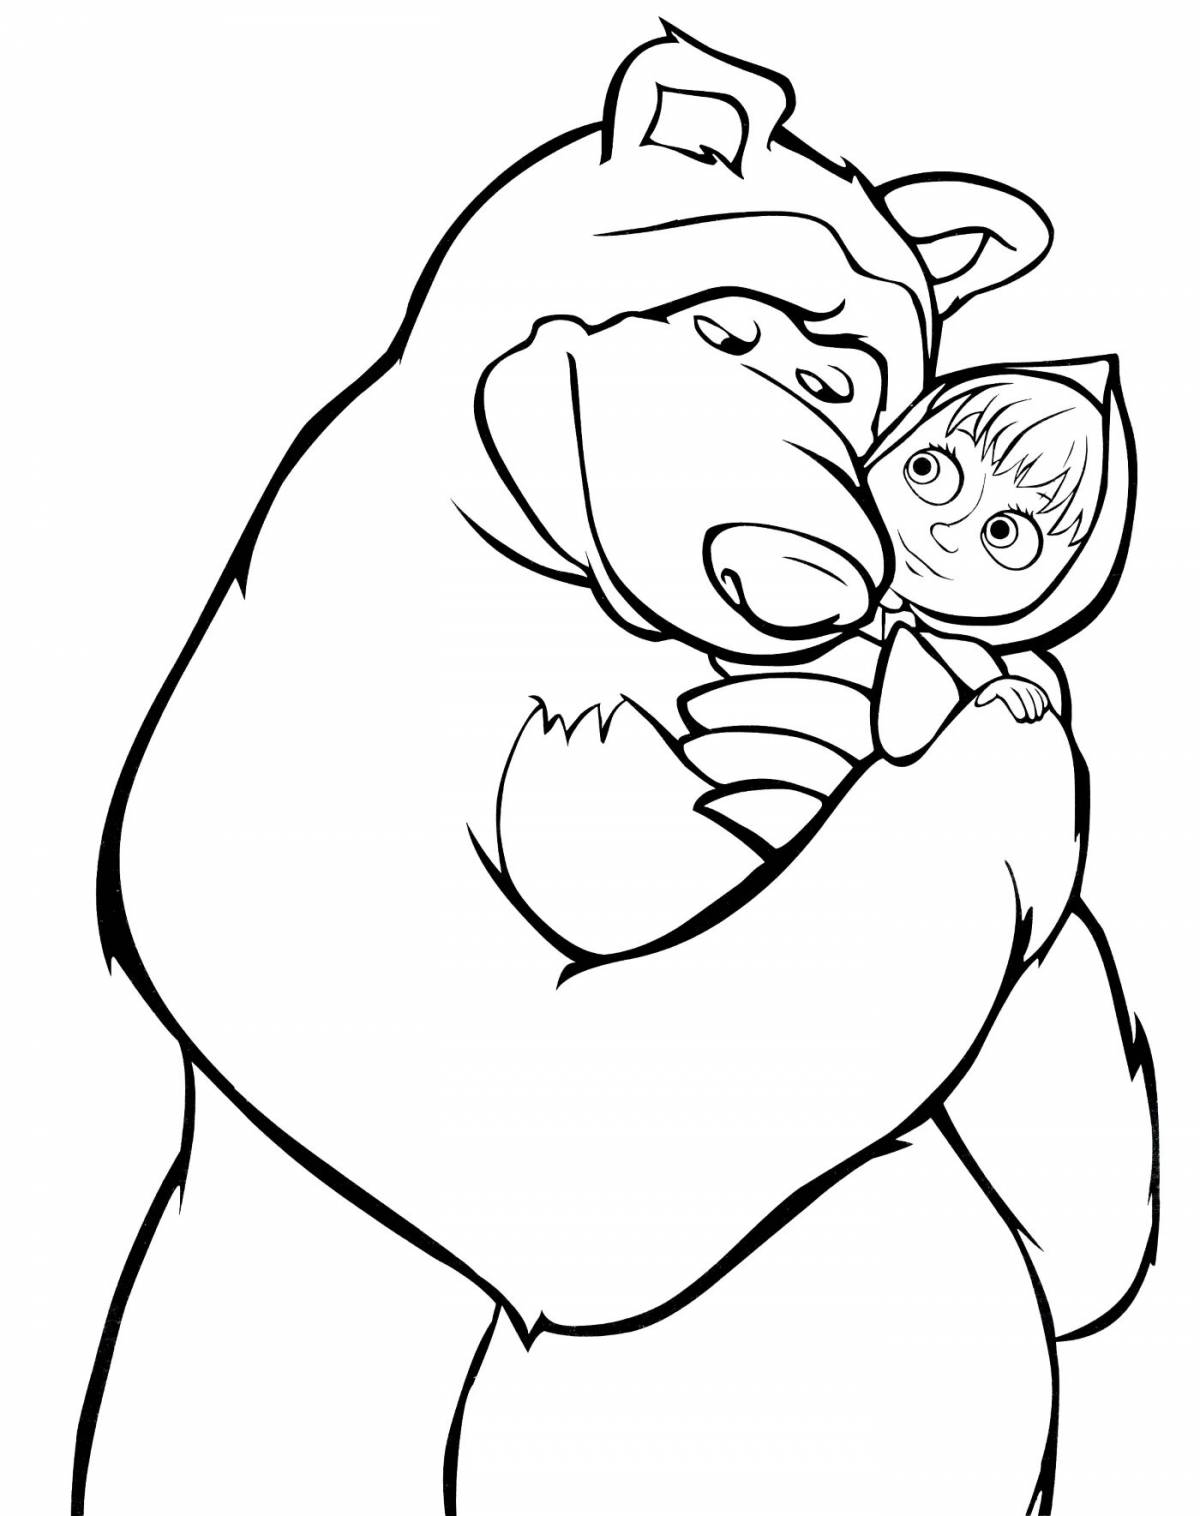 Rich masha and the bear coloring book